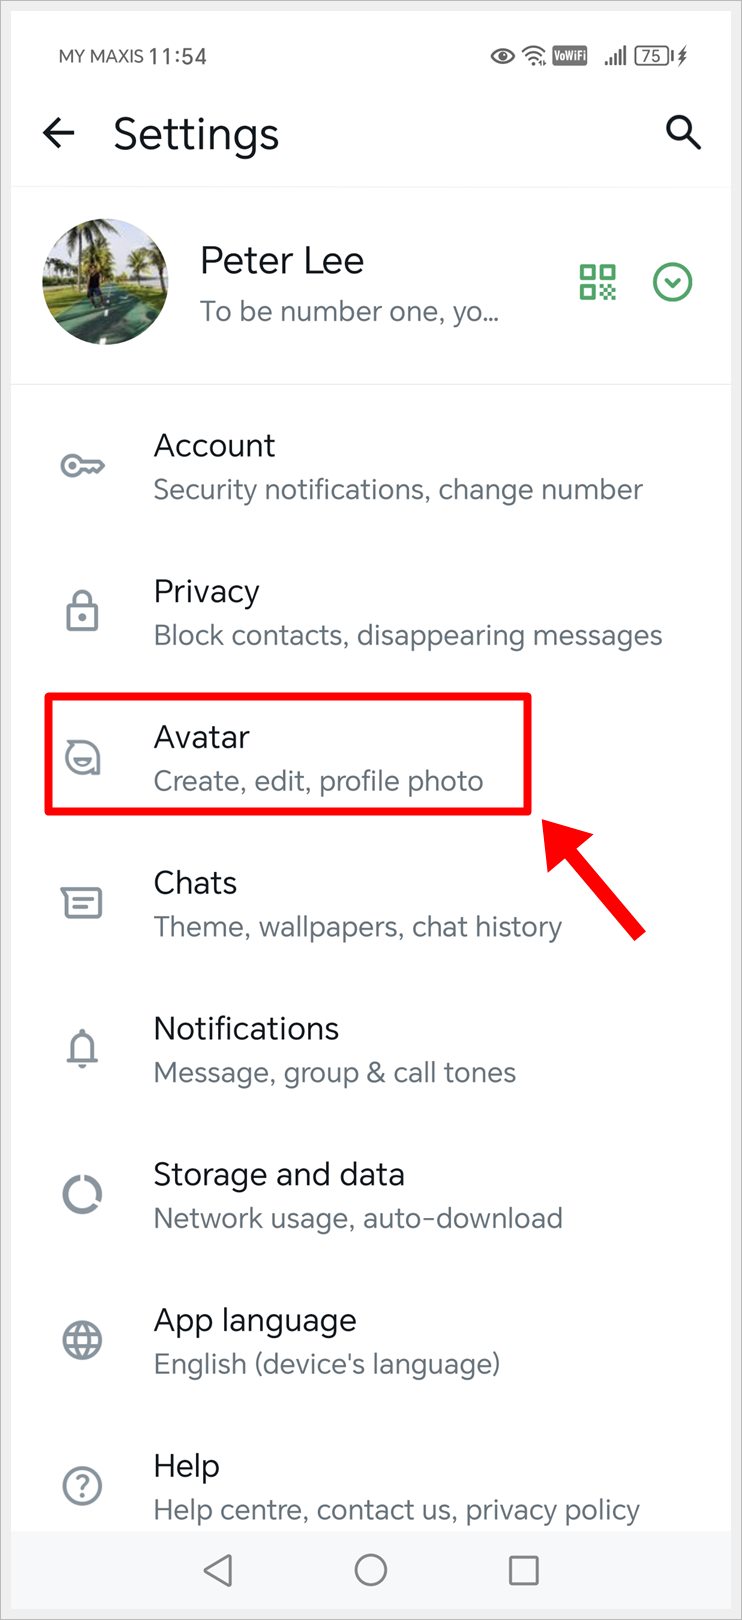 Image shows the 'Settings' page of WhatsApp, with the 'Avatar' option highlighted.